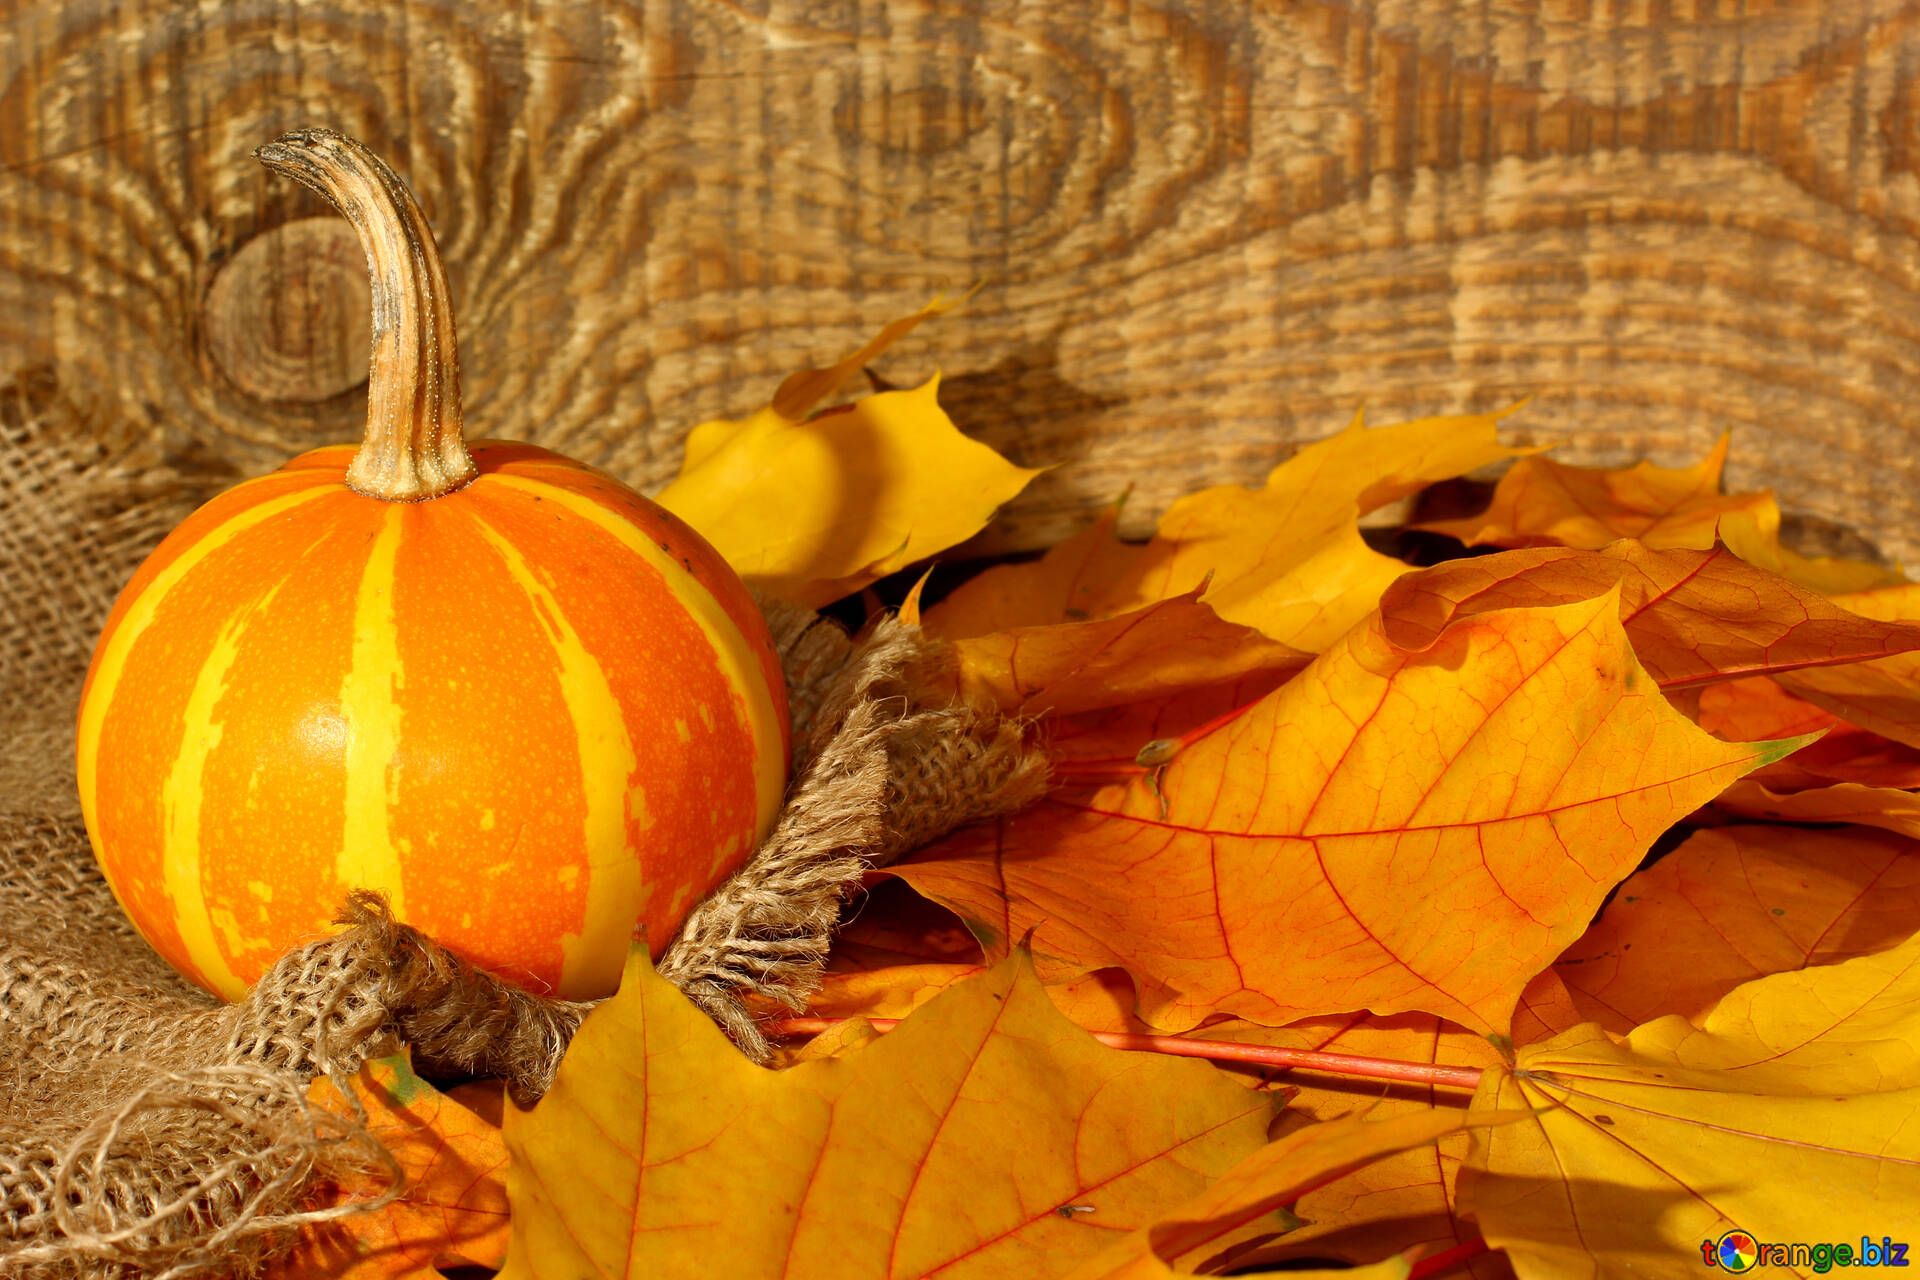 Pumpkins And Autumn Leaves Image Wallpaper With Pumpkin And Autumn Leaves Image Leaves № 35452. Torange.biz Free Pics On Cc By License